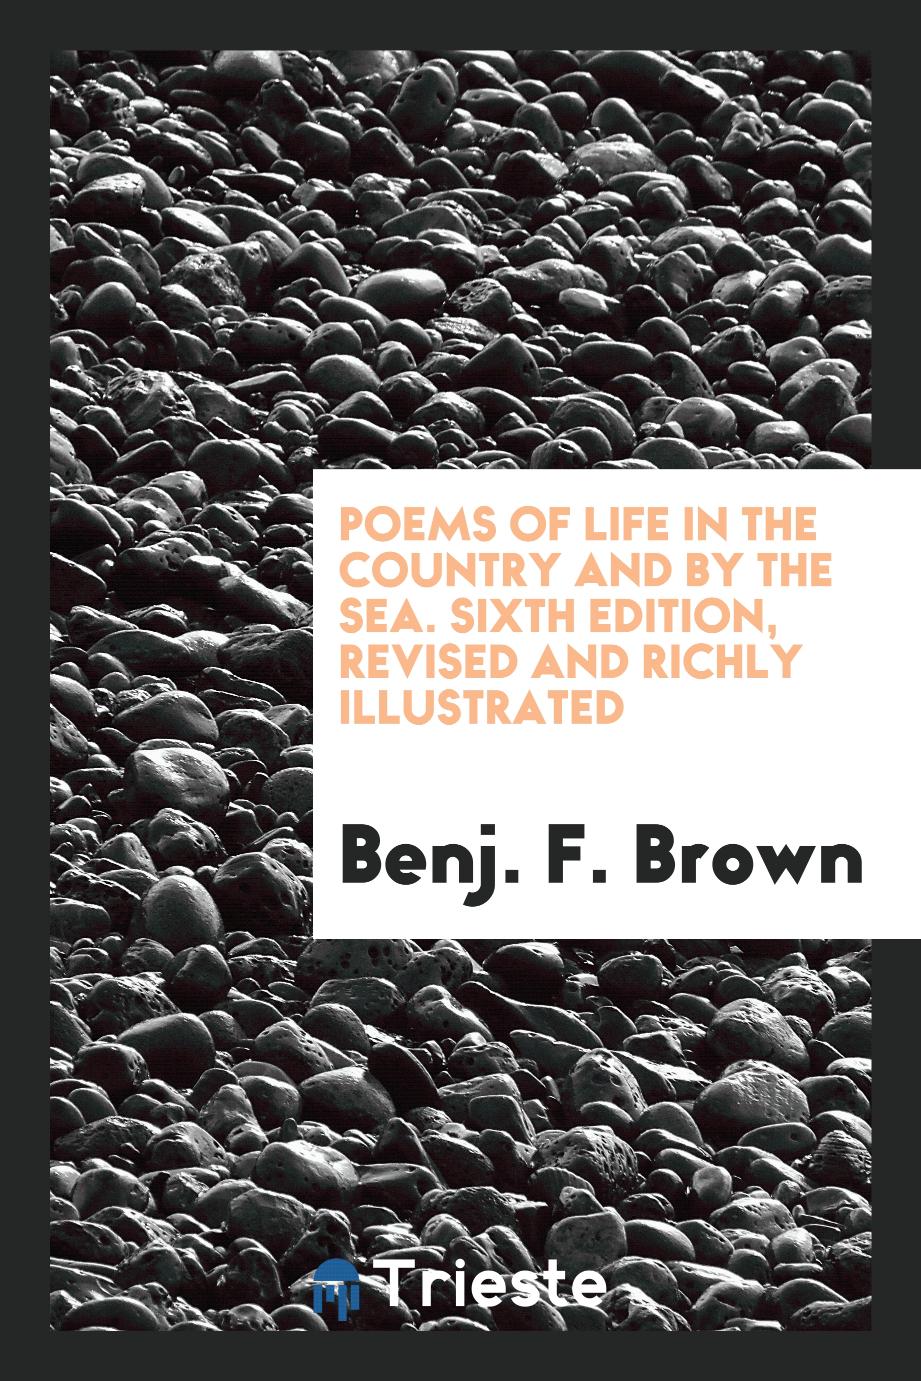 Poems of Life in the Country and by the Sea. Sixth Edition, Revised and Richly Illustrated